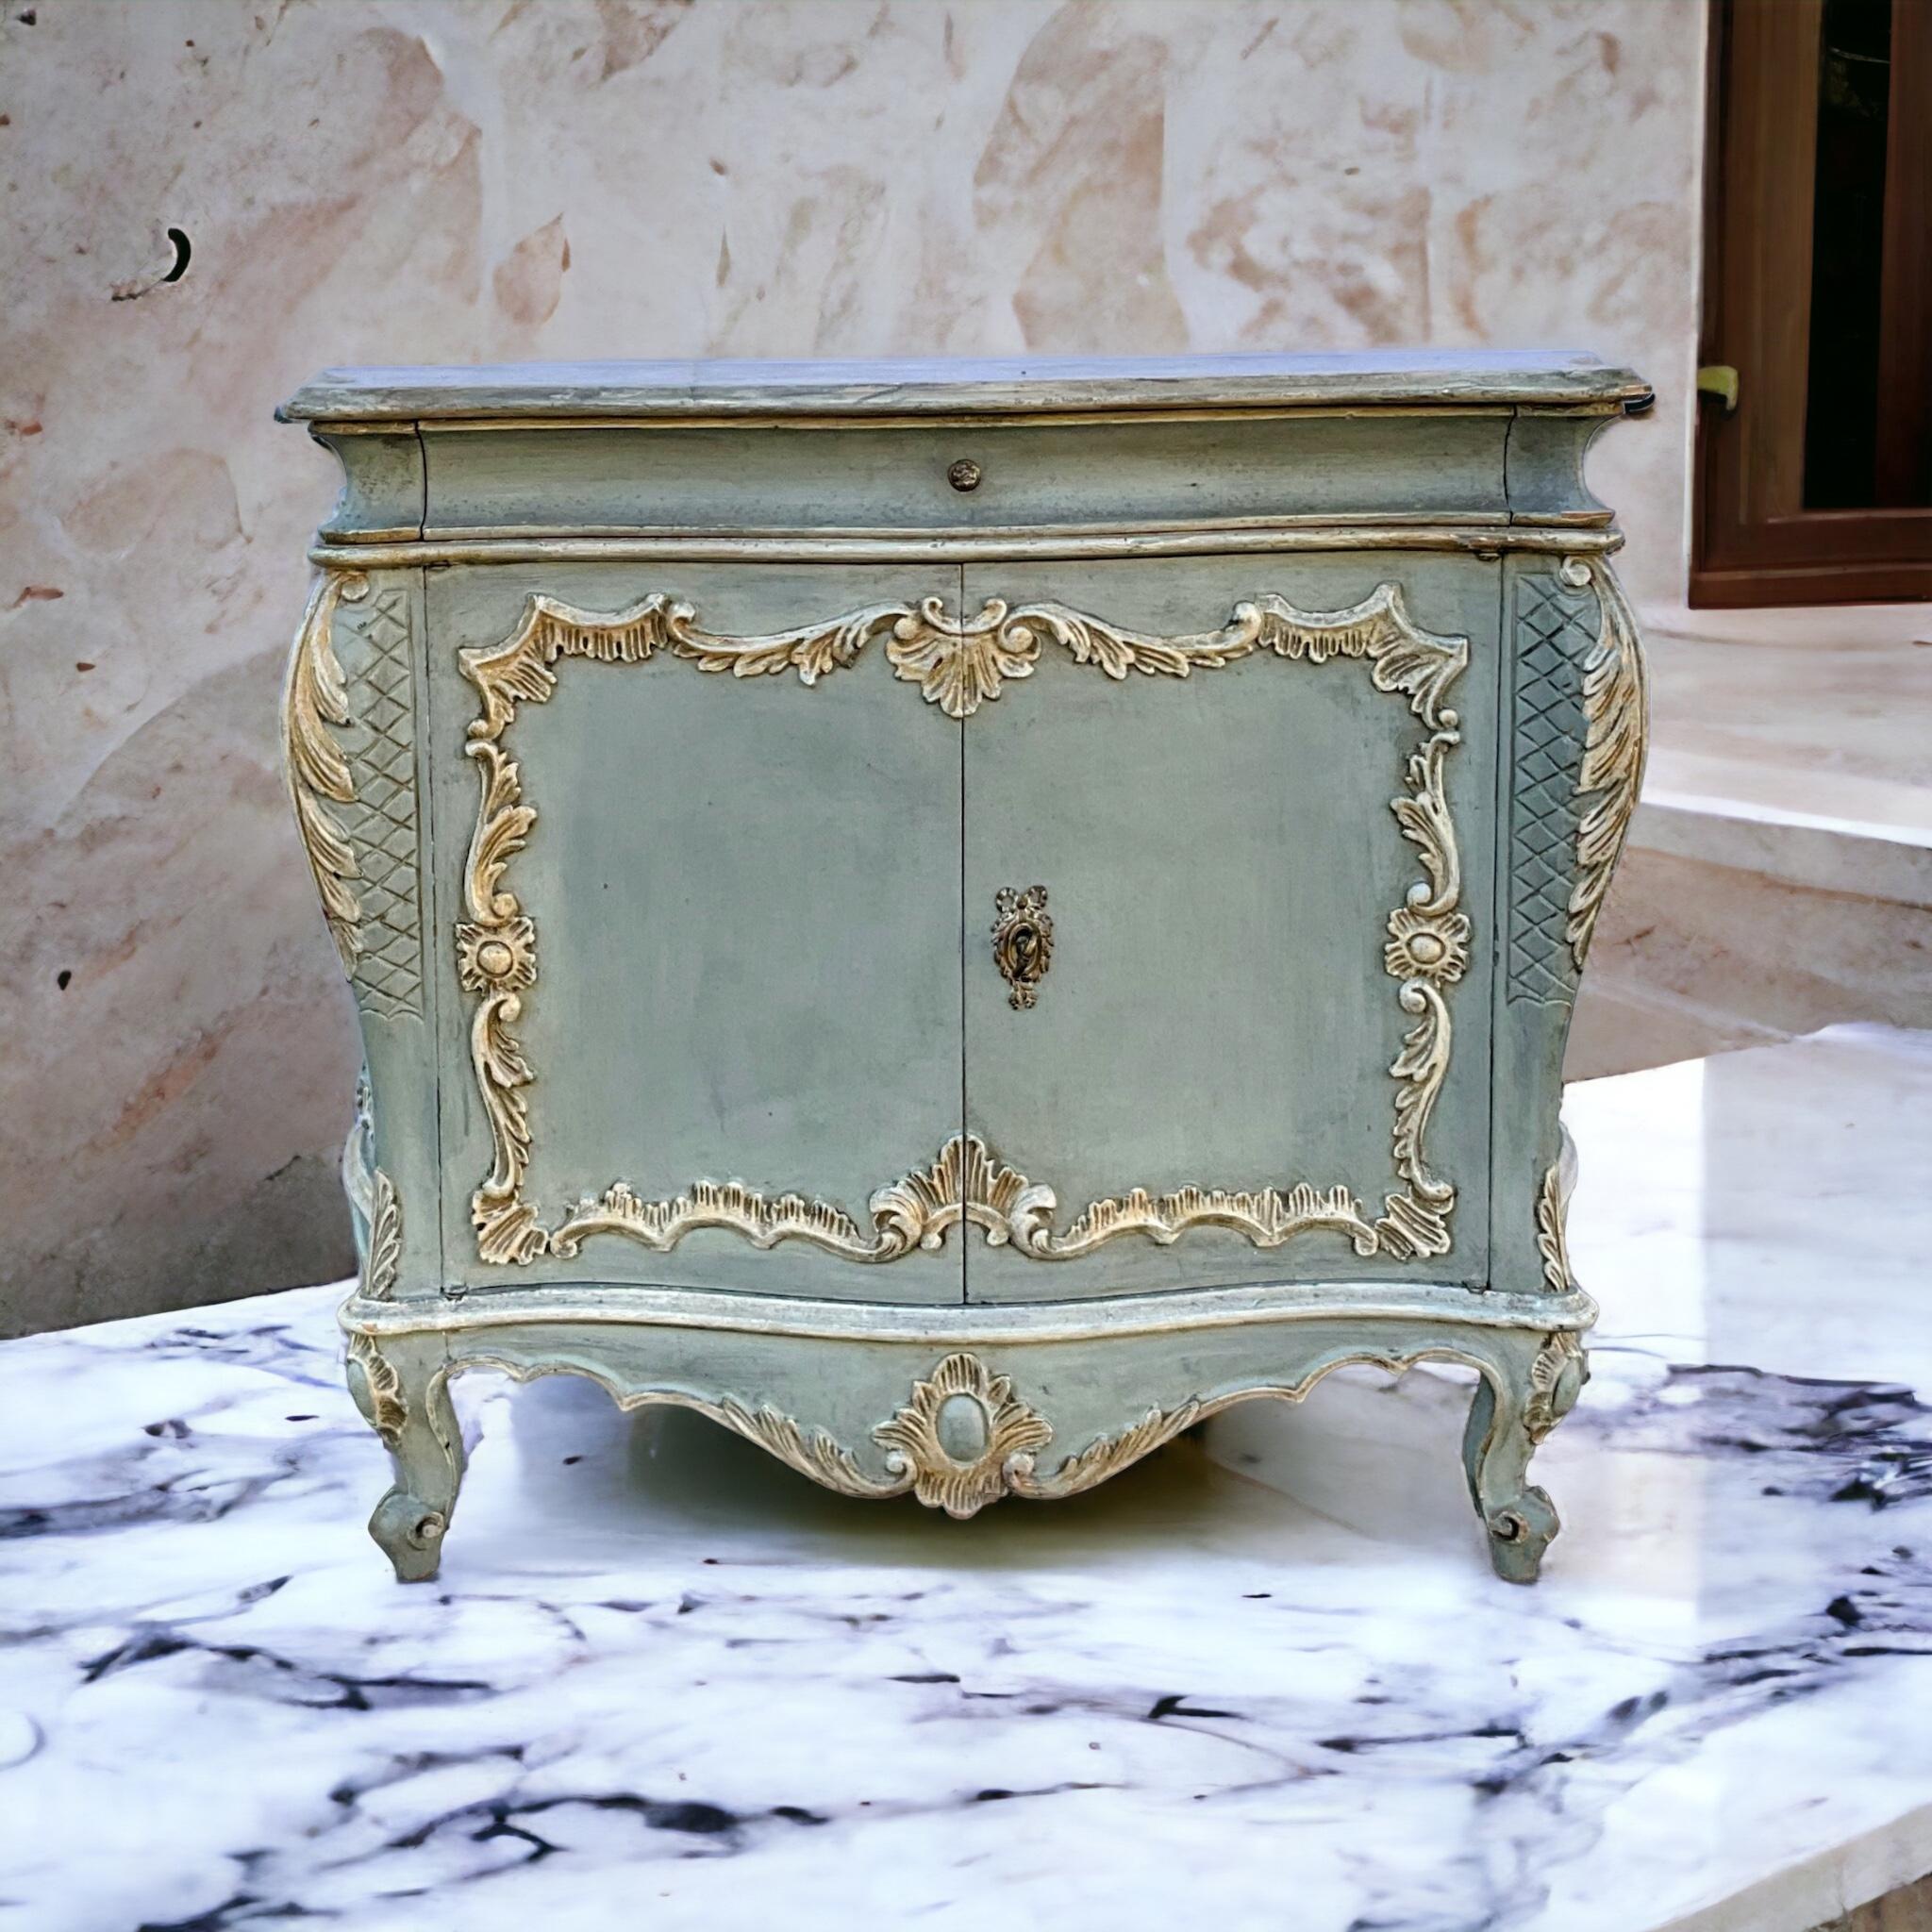 This is an Italian Rococo style heavily carved commode in a French blue with ivory embellishments. The top is a hand painted faux marble. It is marked, “Made in Italy.” It is a mid-century piece with a single drawer over two doors.